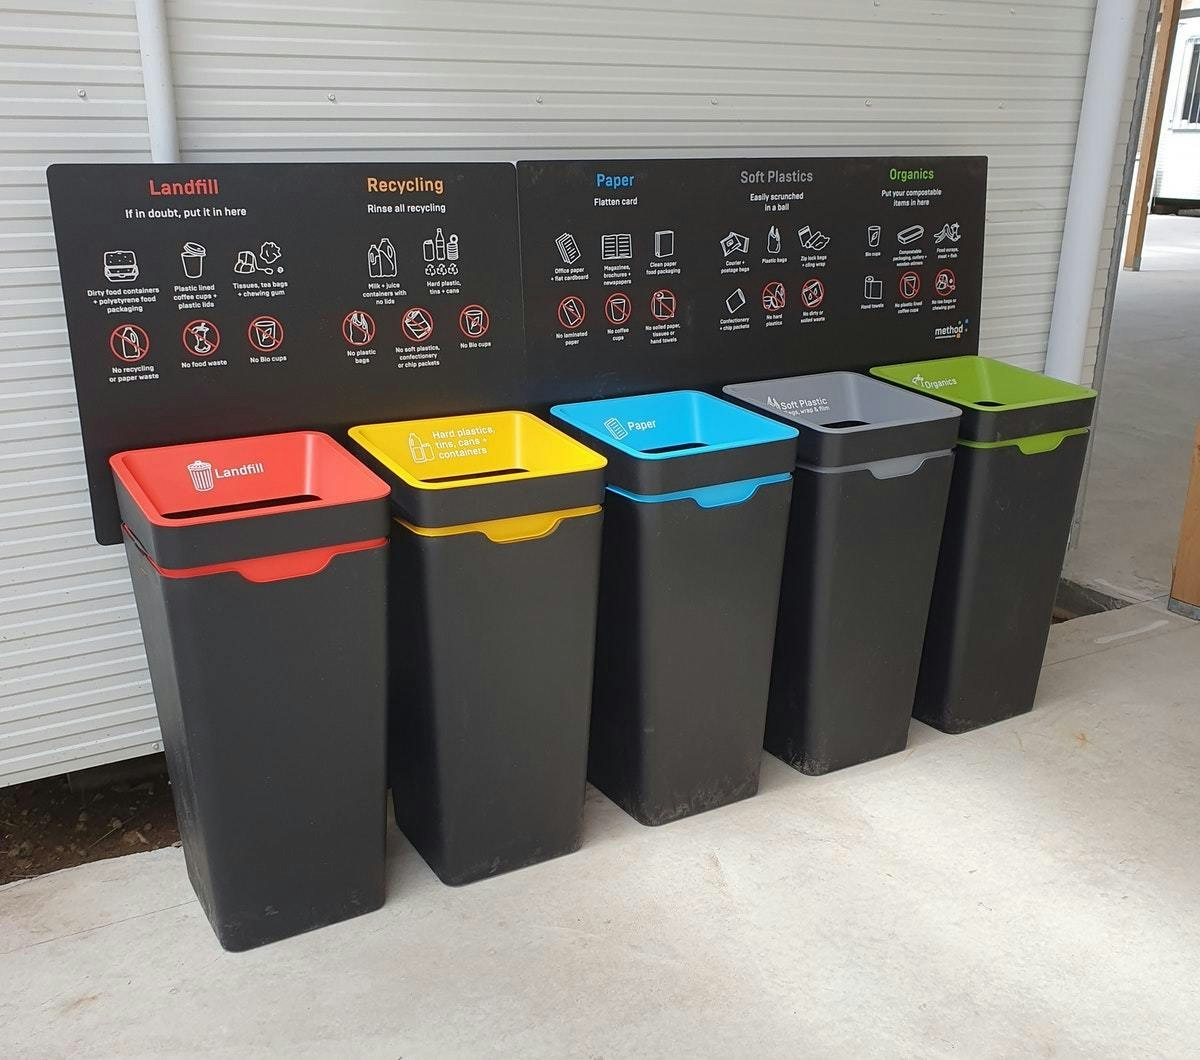 Waste bin colours - what do they mean?